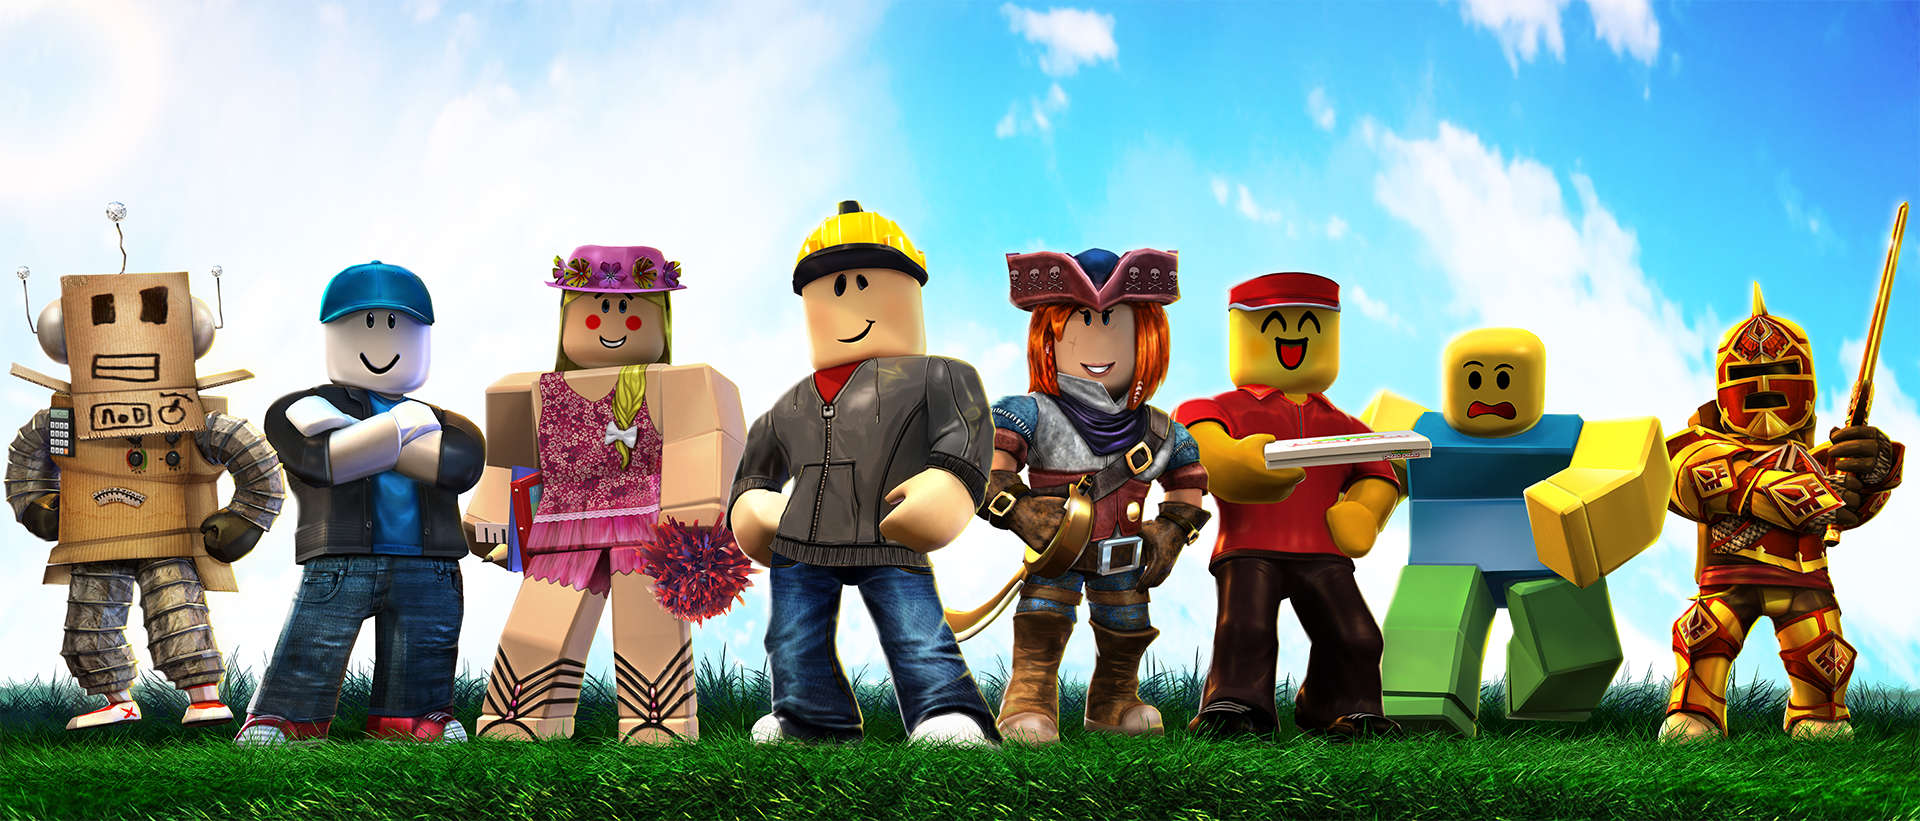 Roblox Raises 150 Million In Funding Is Now Reportedly Worth 2 5 Billion - roblox 150m late venture 4b